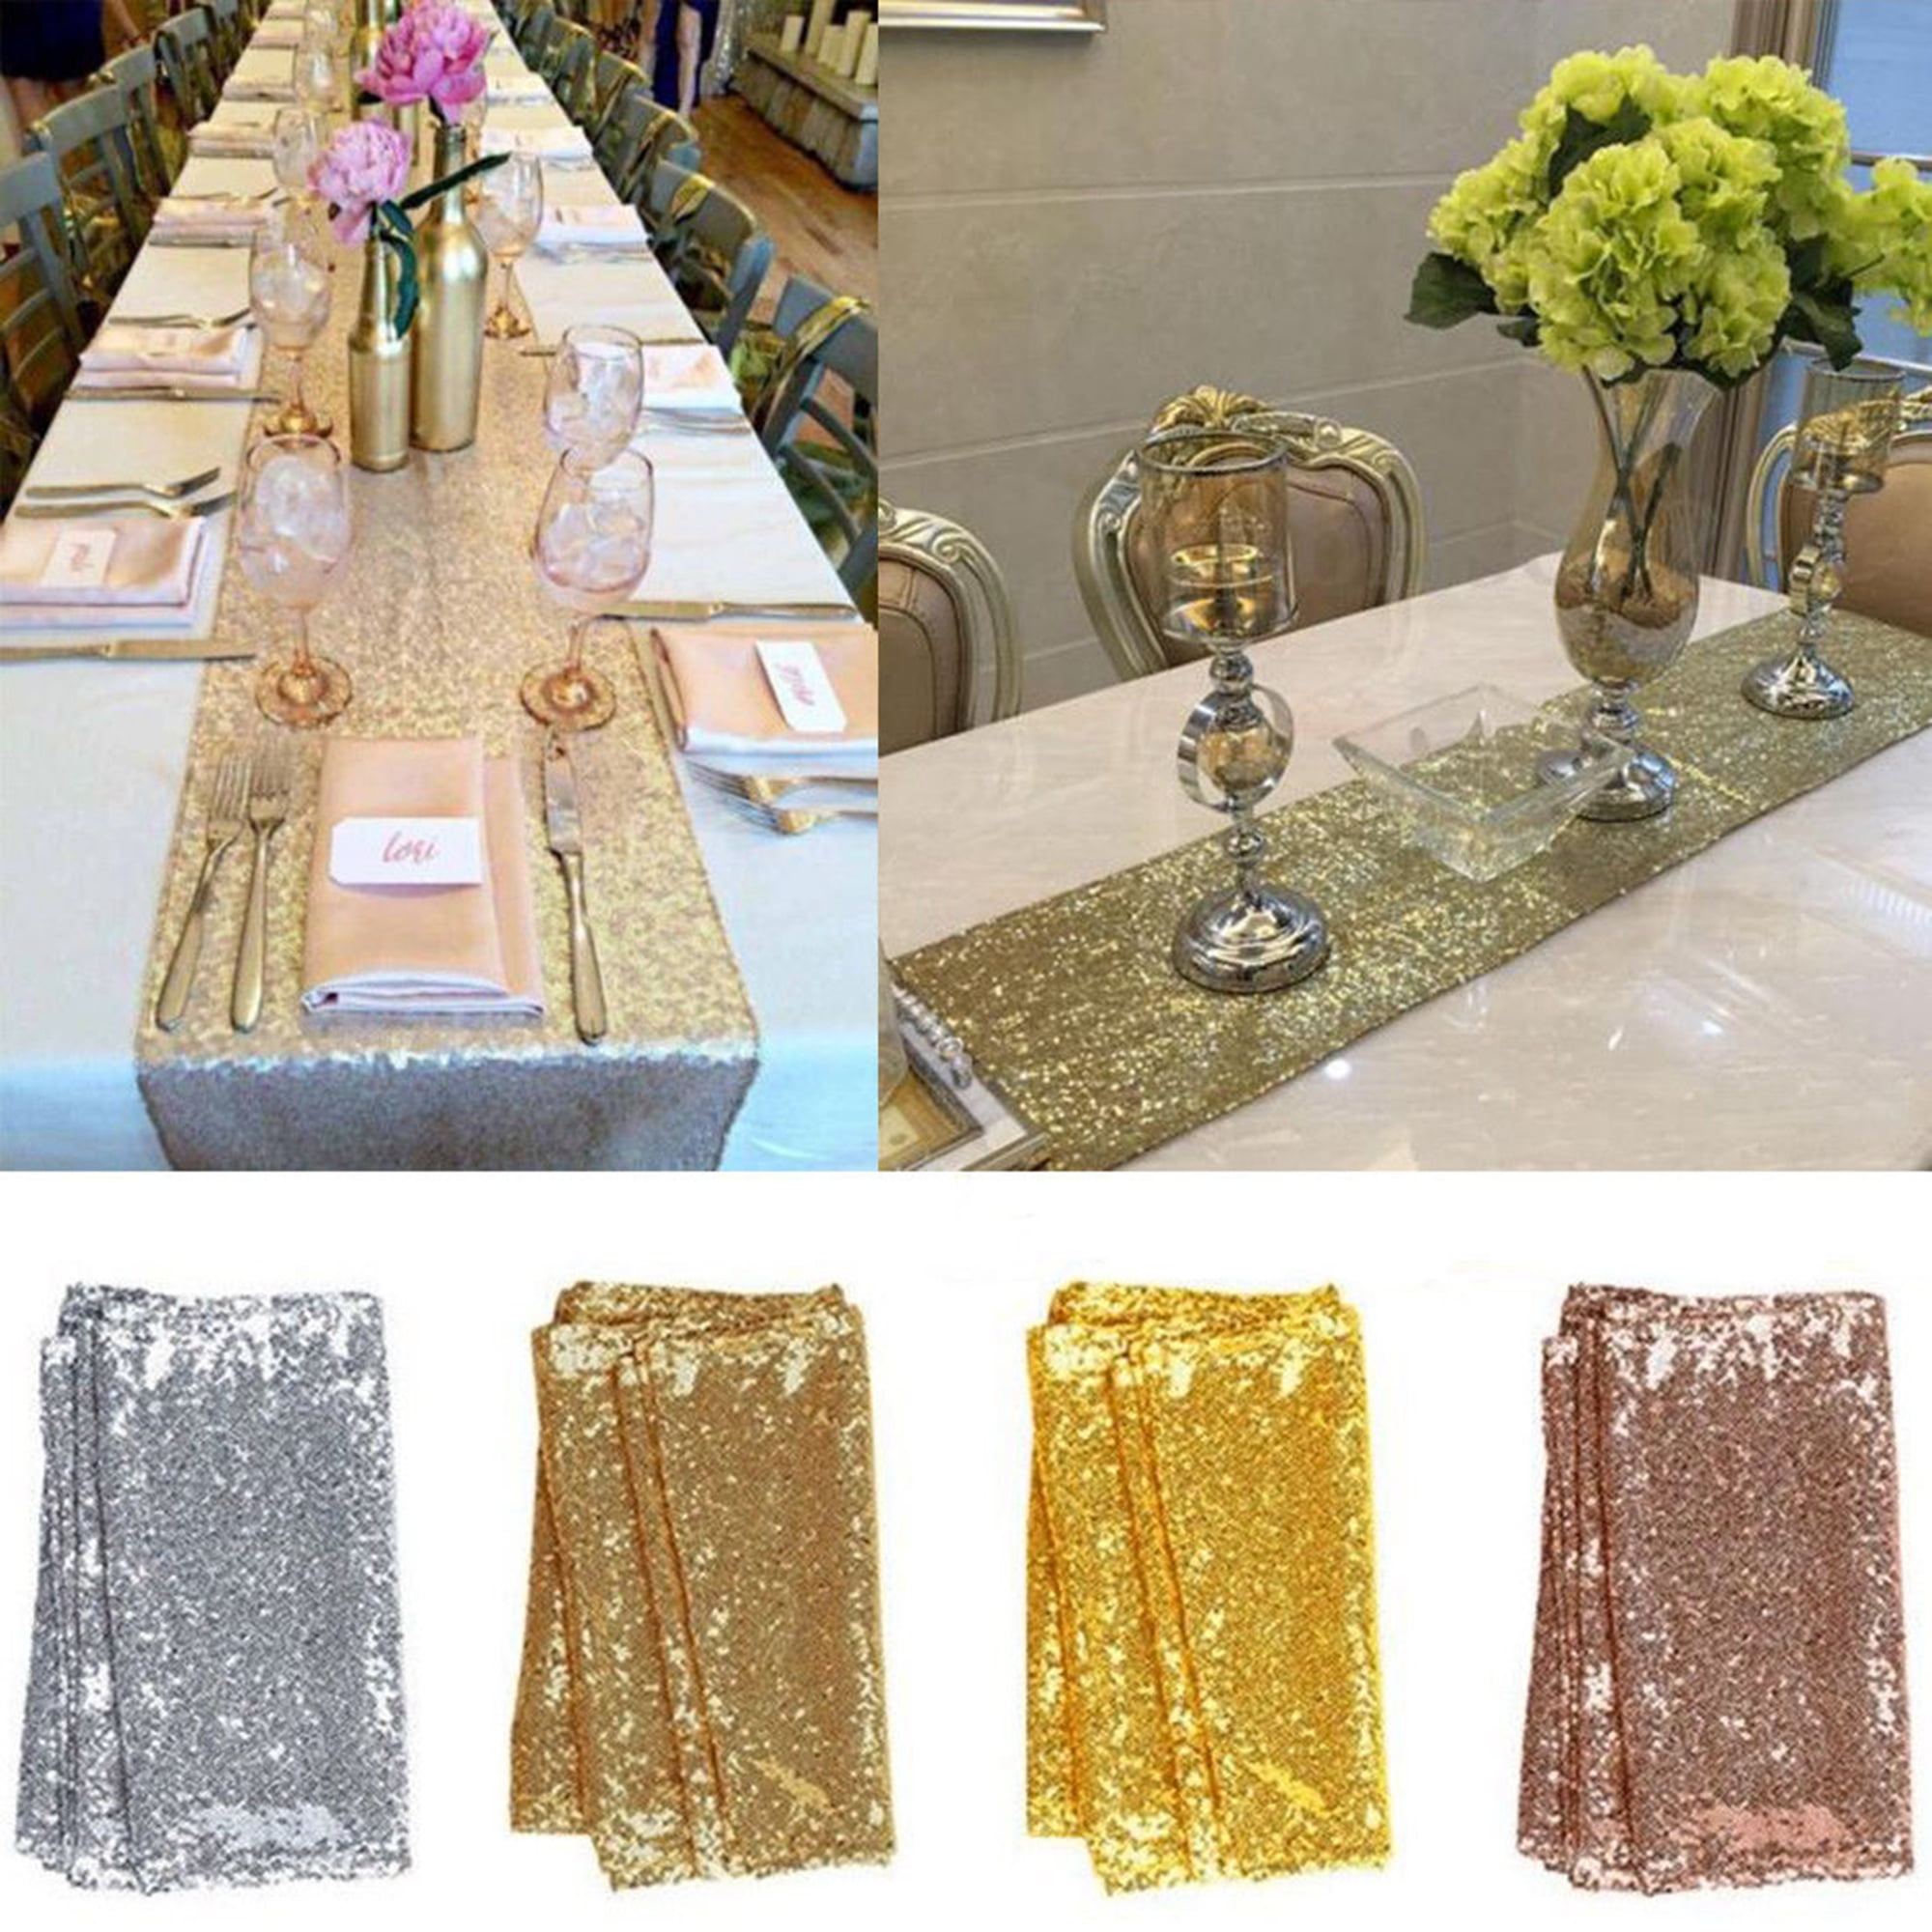 MENGQ Silver Table Runner 12x108 Pack of 2 Sequin Table Runner Party Decor Glitter Table Linens Runner Sparkly Dinner Party Supplies Fabric for Baby Shower Holiday Celebrations 